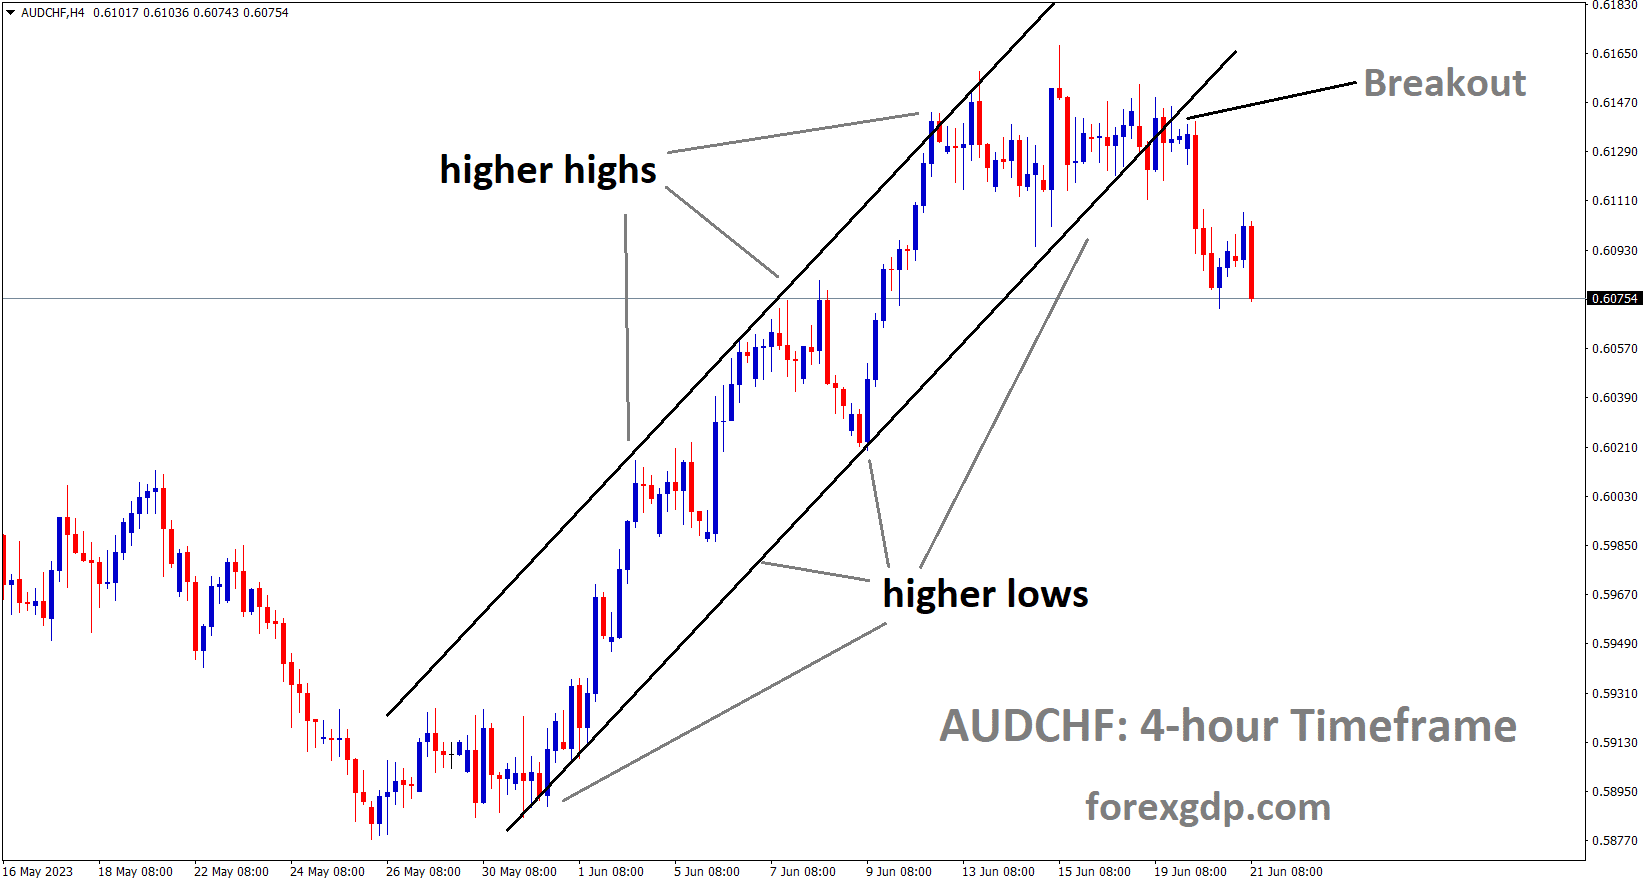 AUDCHF is moving in an Ascending channel and the market has reached the higher low area of the channel